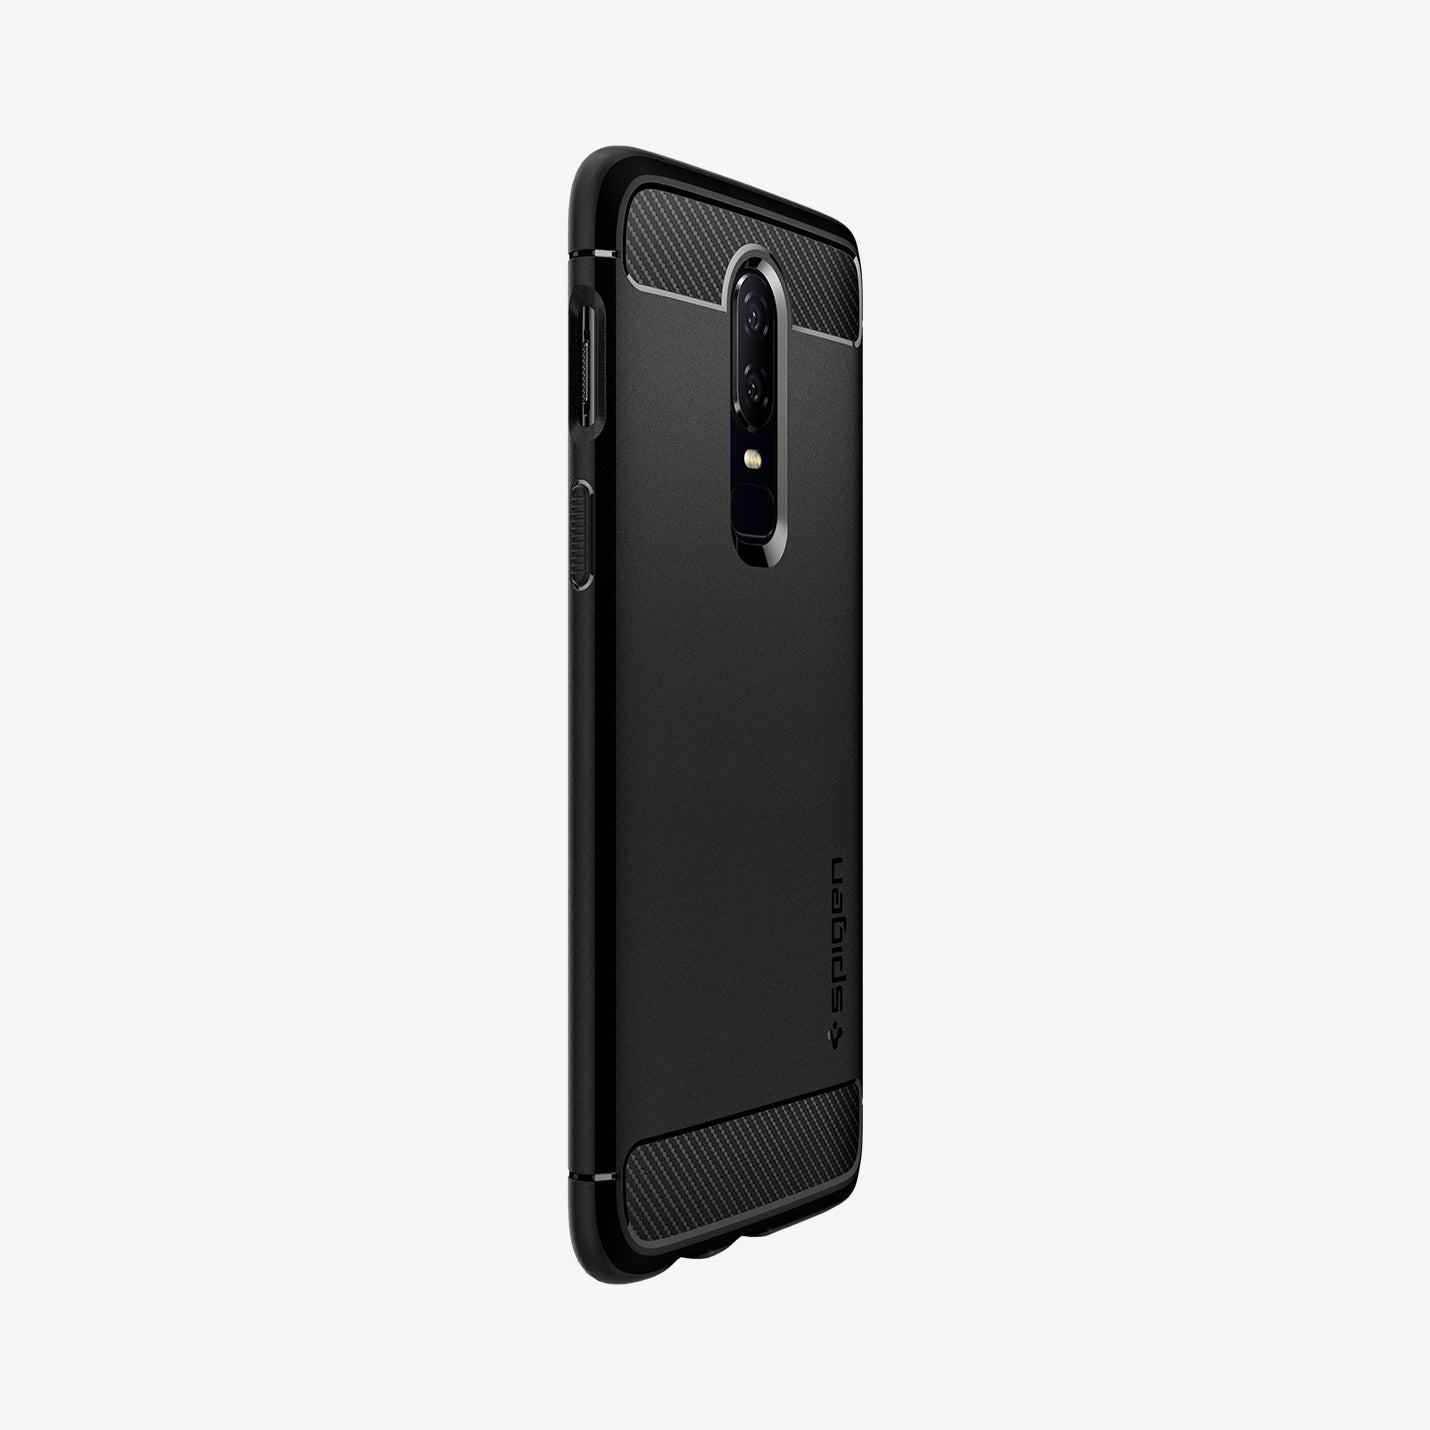 K06CS23358 - OnePlus 6 Rugged Armor Case in Black showing the back and partial side